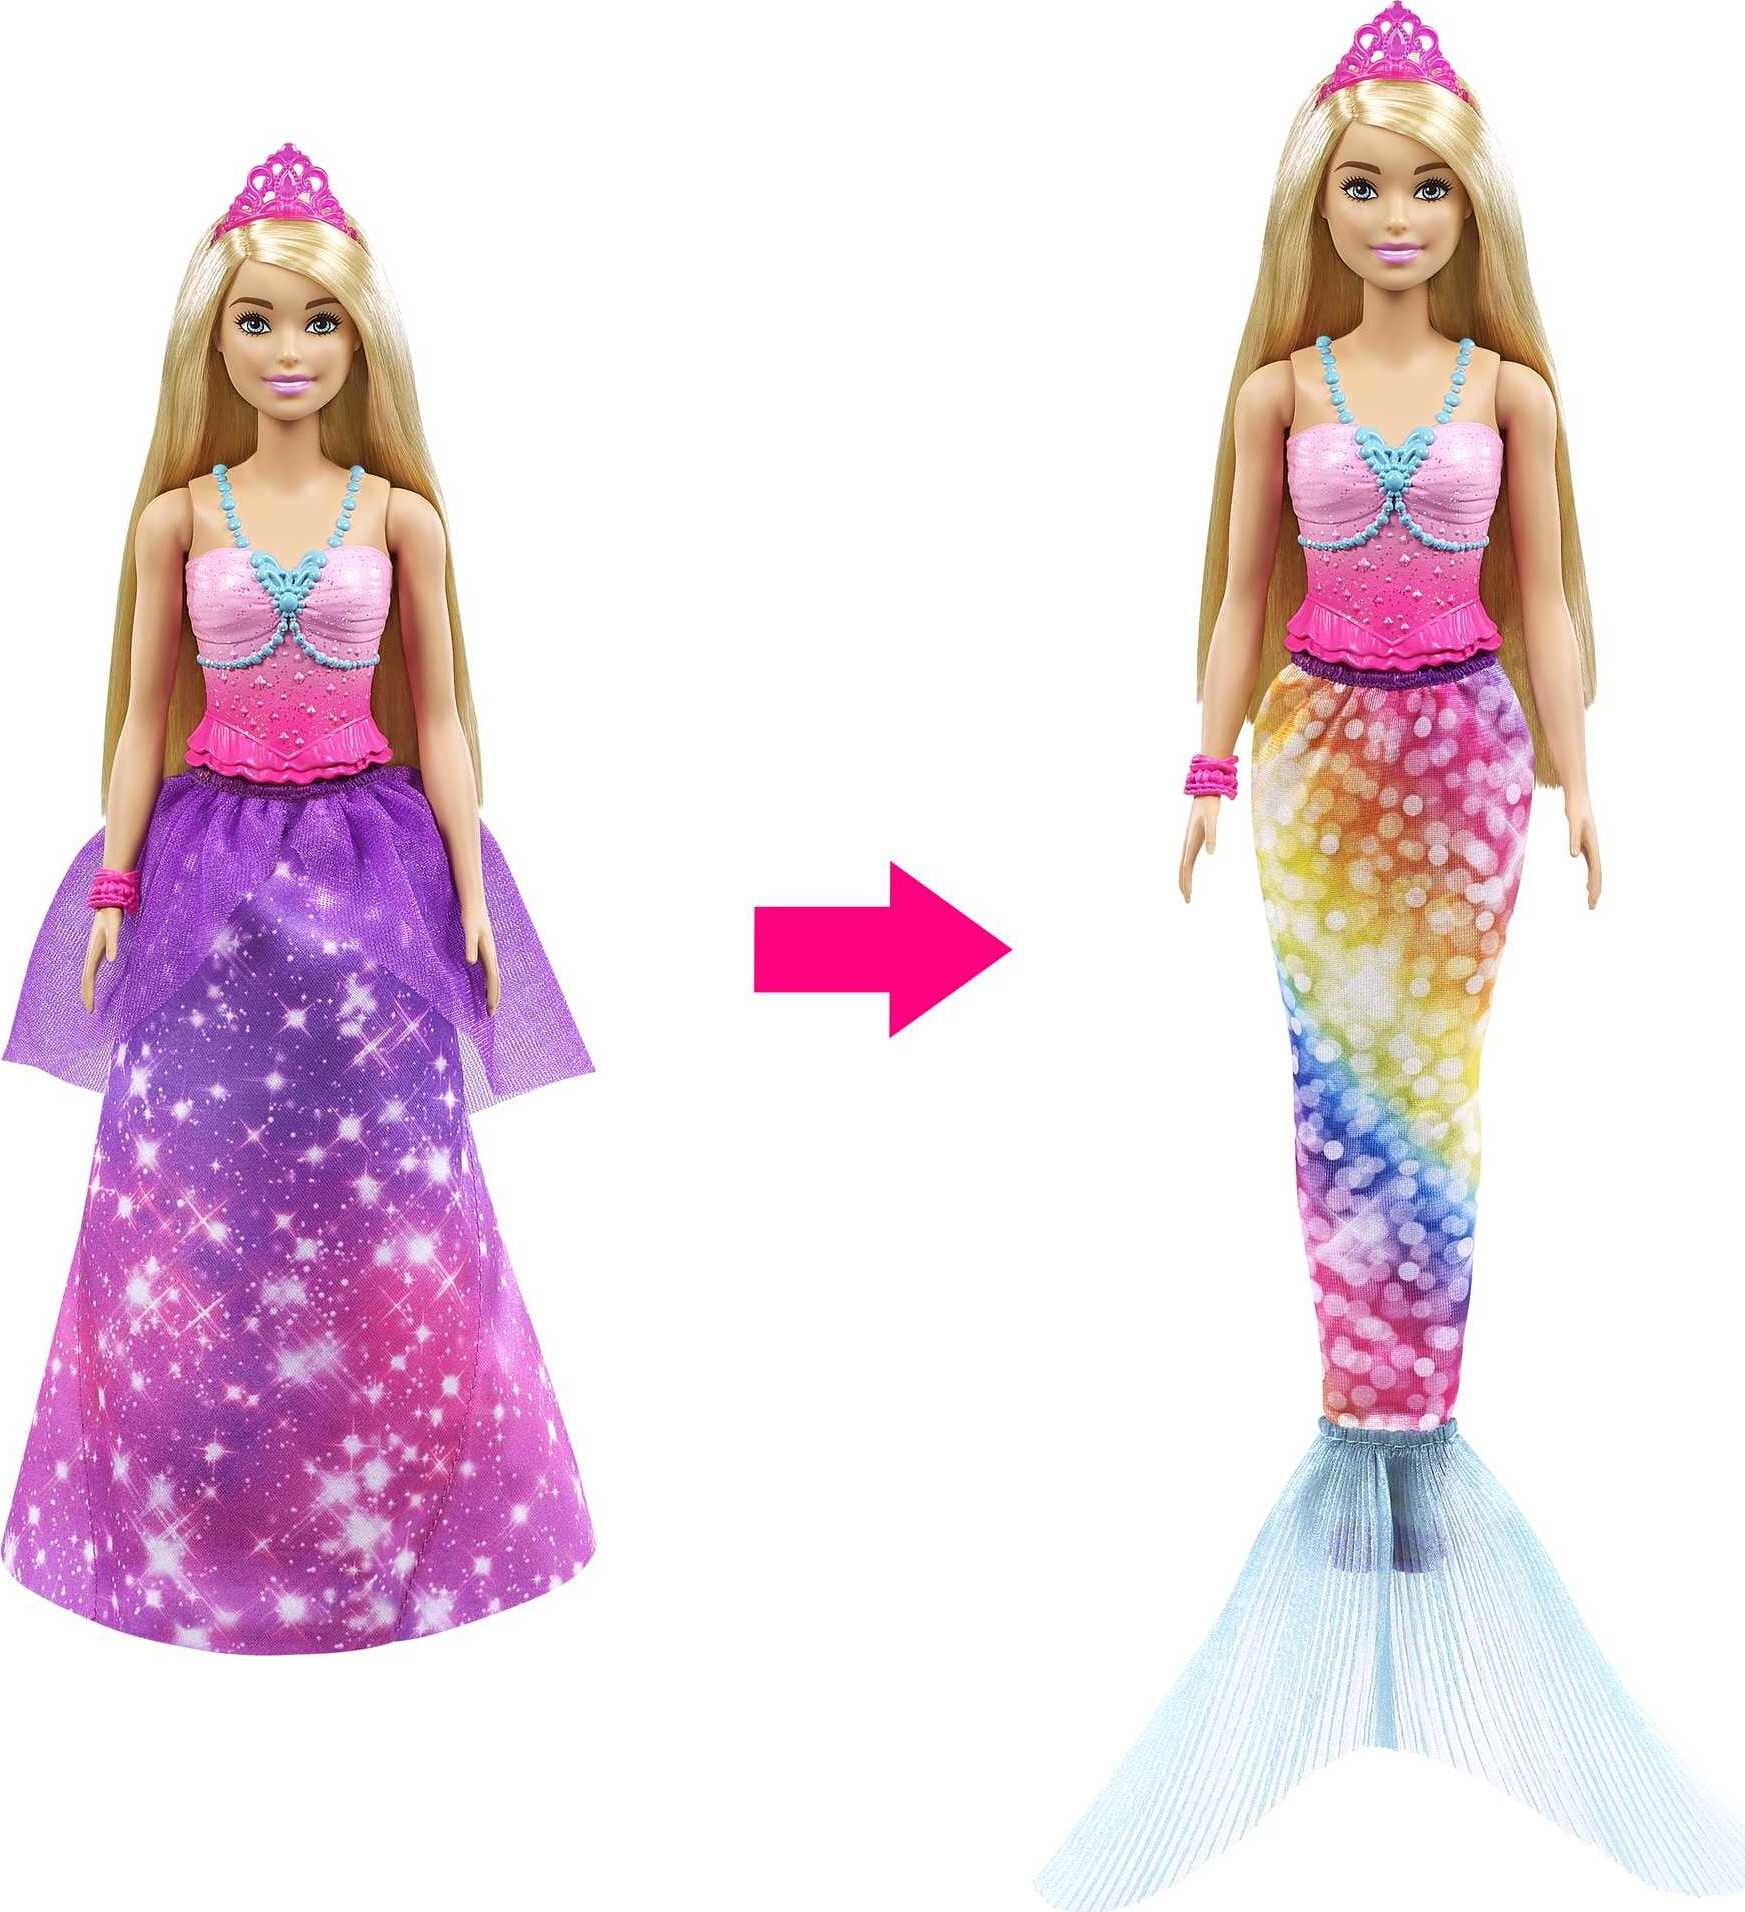 Barbie Dreamtopia Fairytale Doll, 2-in-1 Royal to Mermaid Transformation  with Accessories - Walmart.com